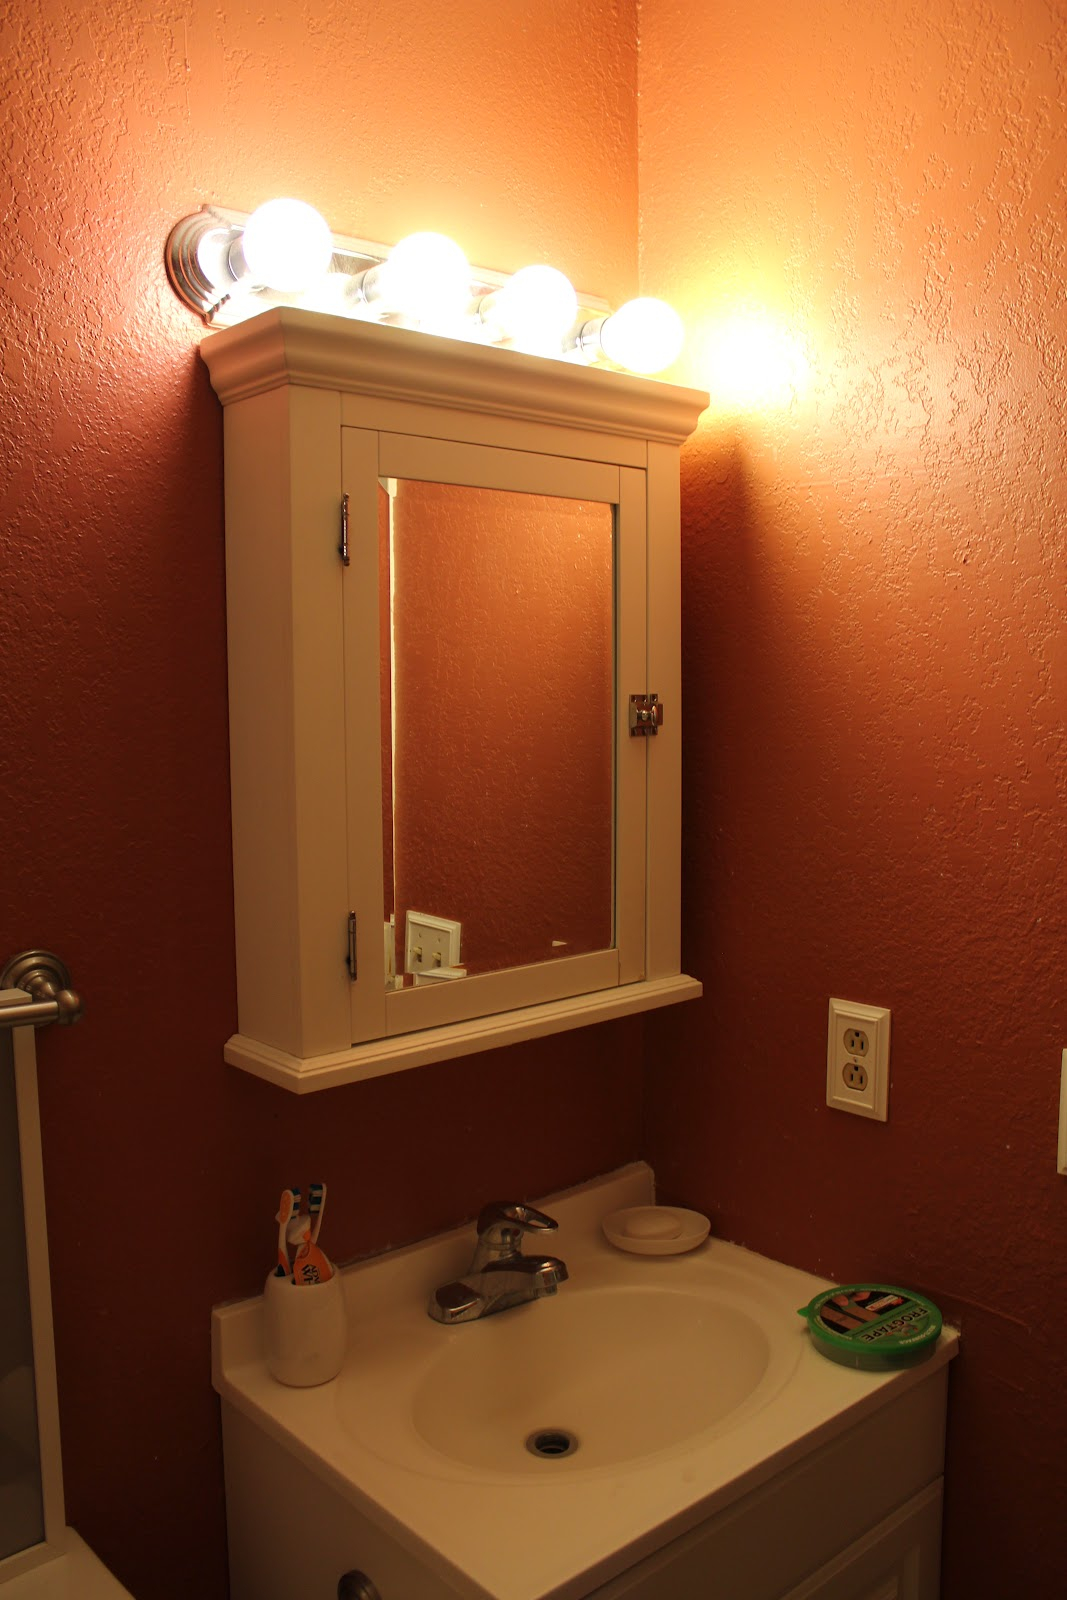 Bathroom Medicine Cabinet With Light Photos And Products Ideas for size 1067 X 1600